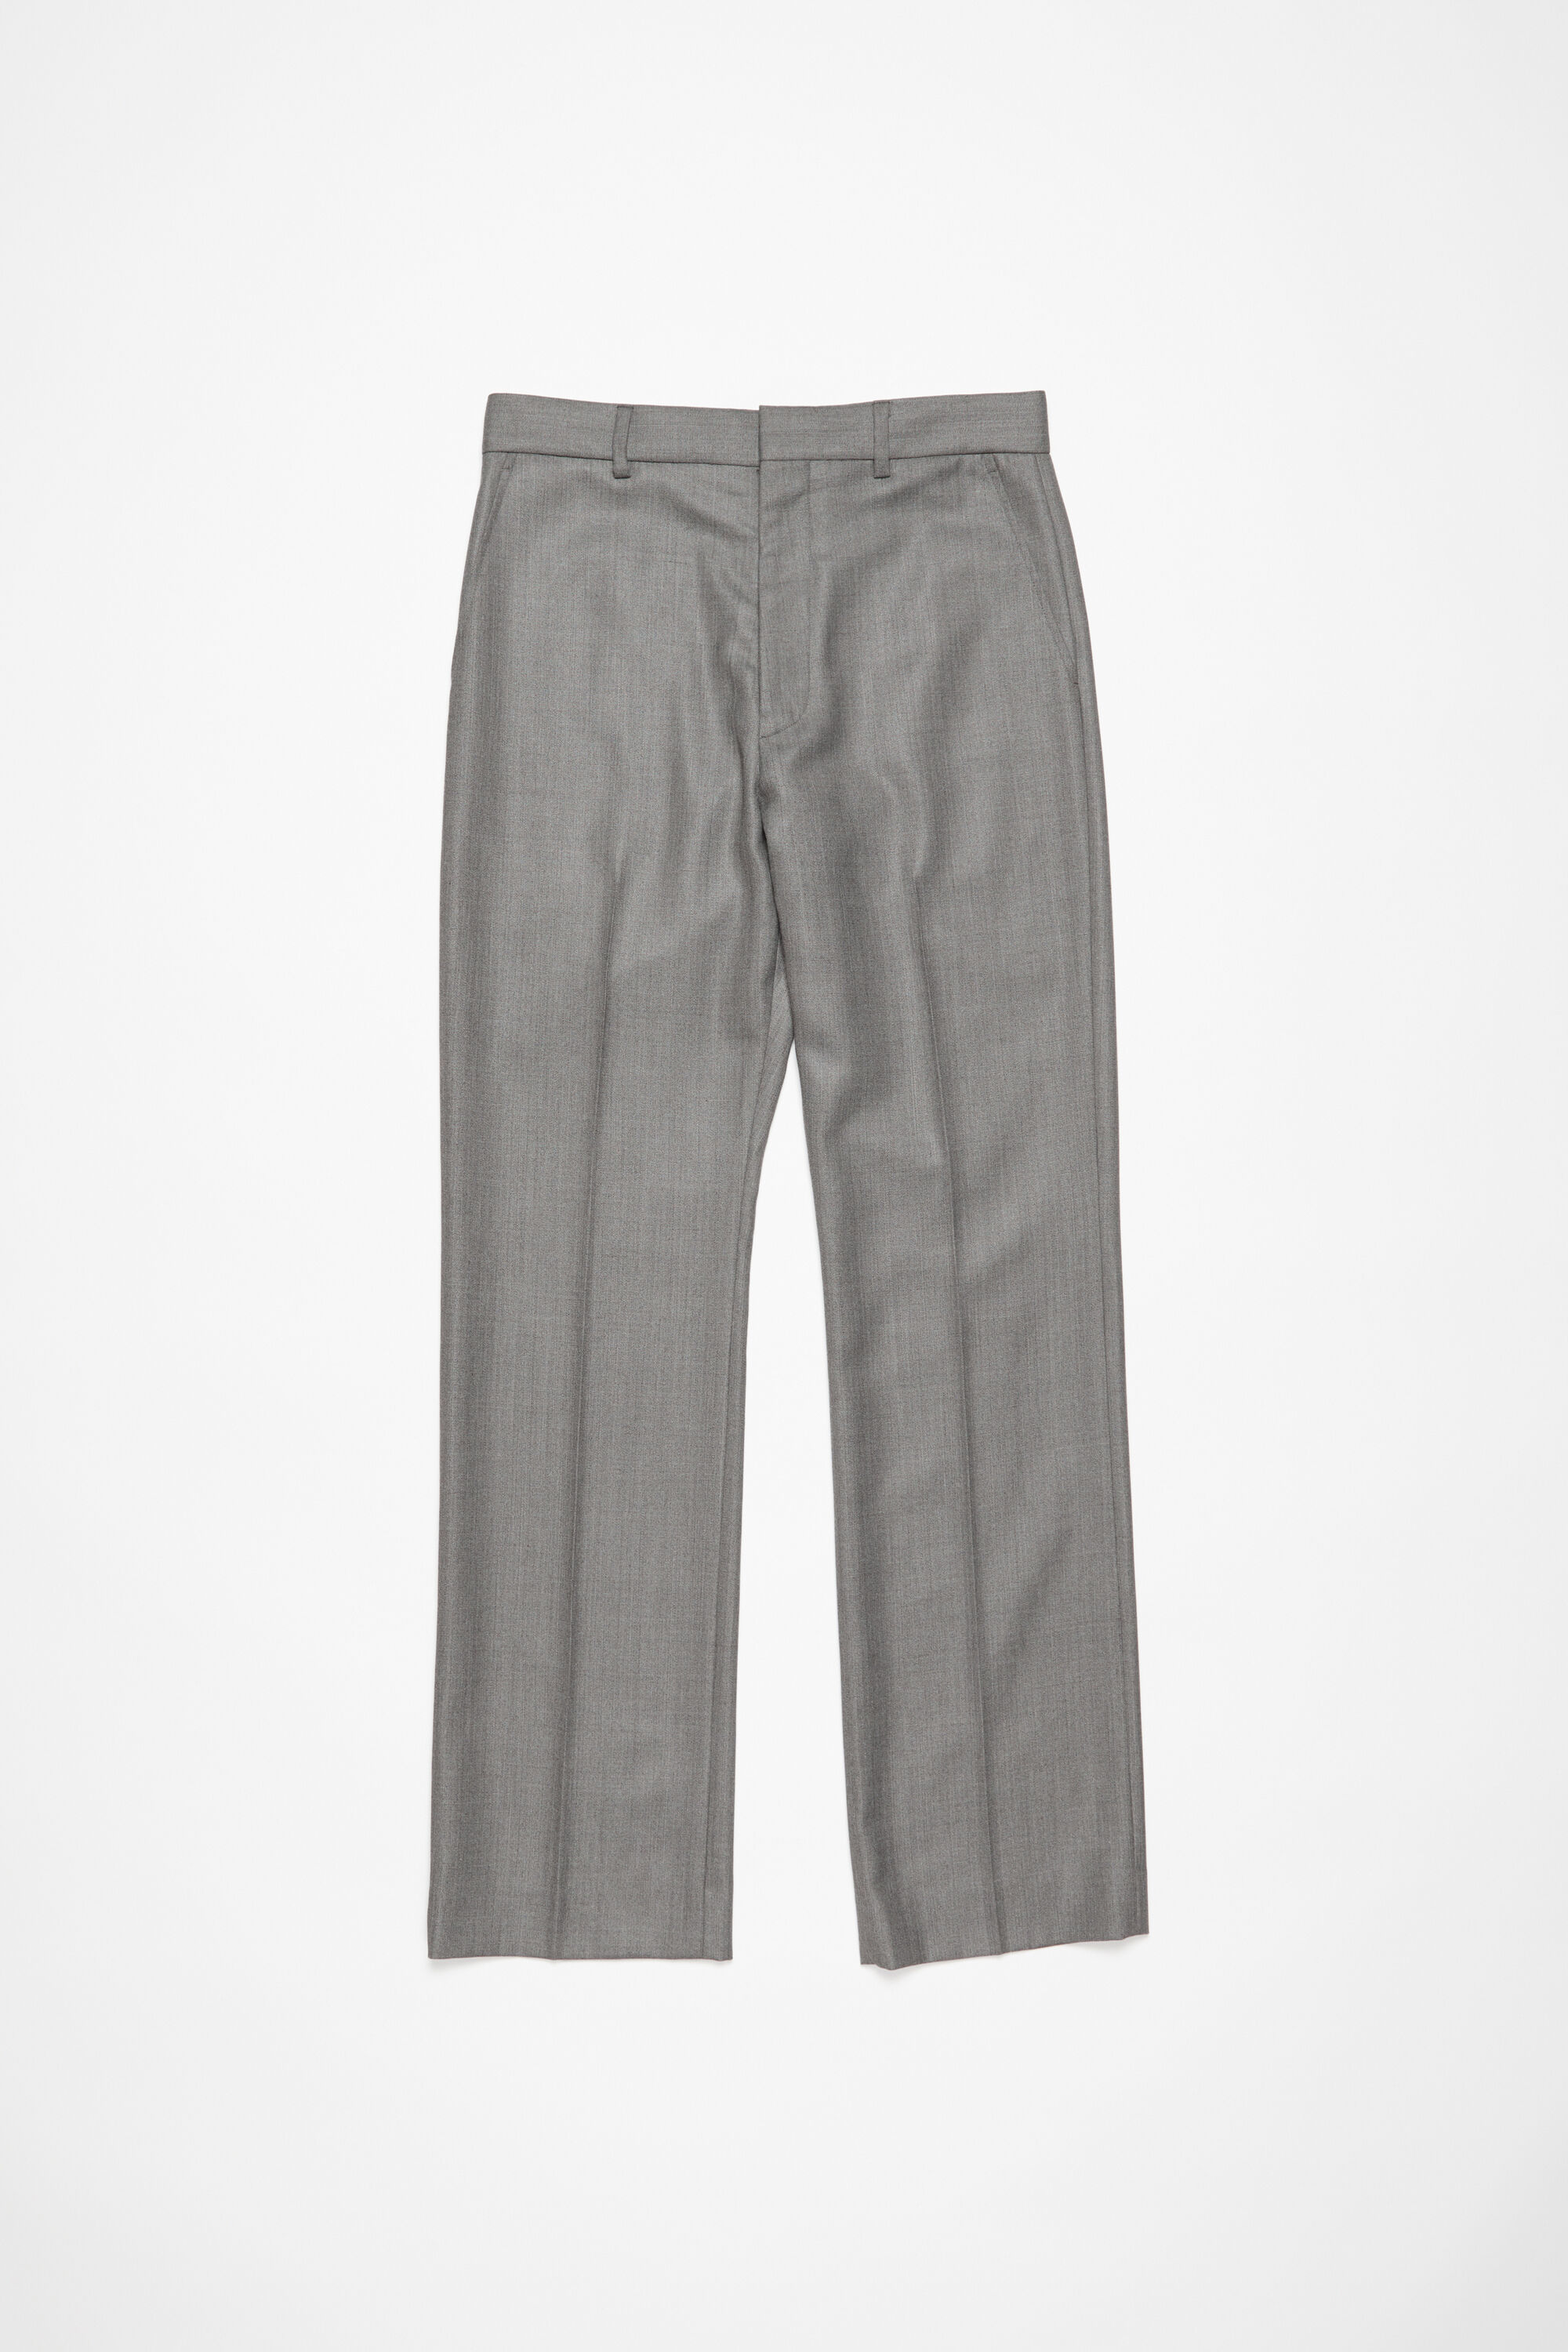 BOSS - All-gender relaxed-fit trousers in melange wool